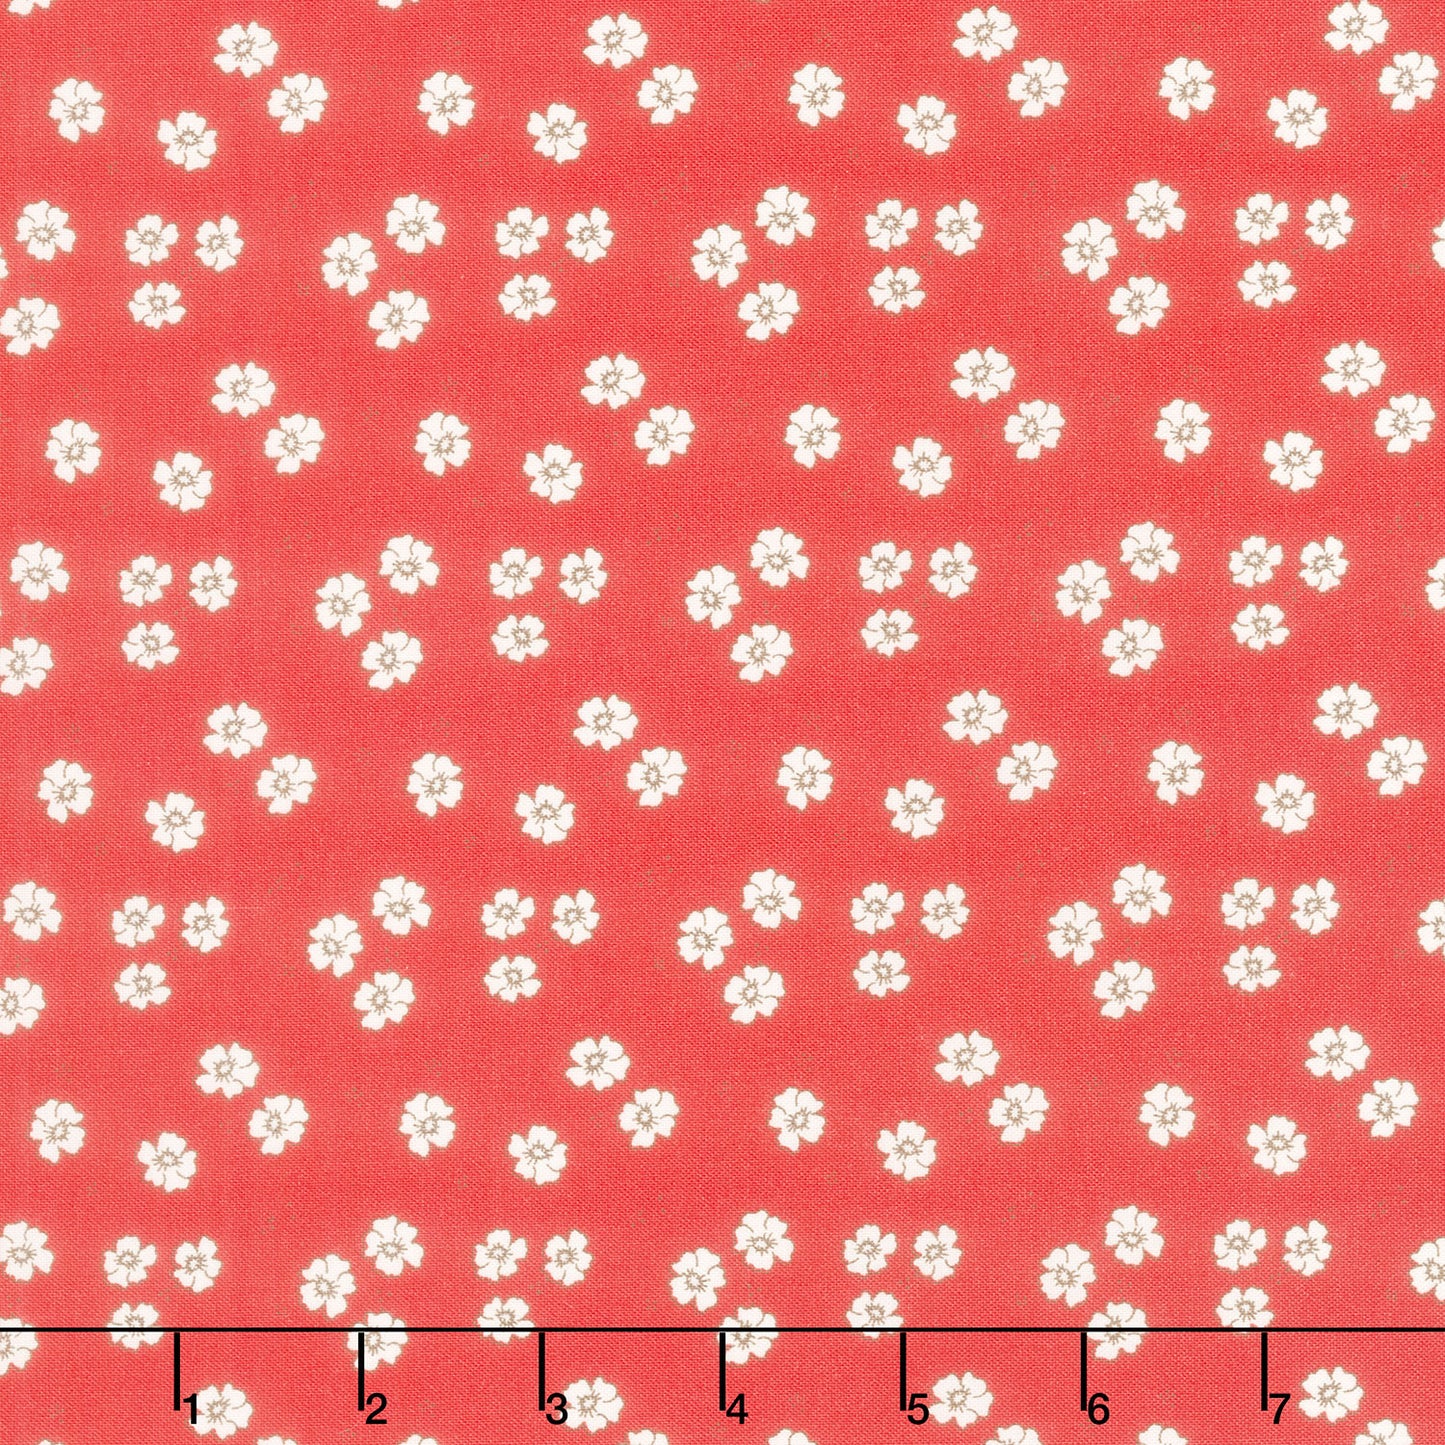 Bloomberry - Flower Bed Autumn Yardage Primary Image